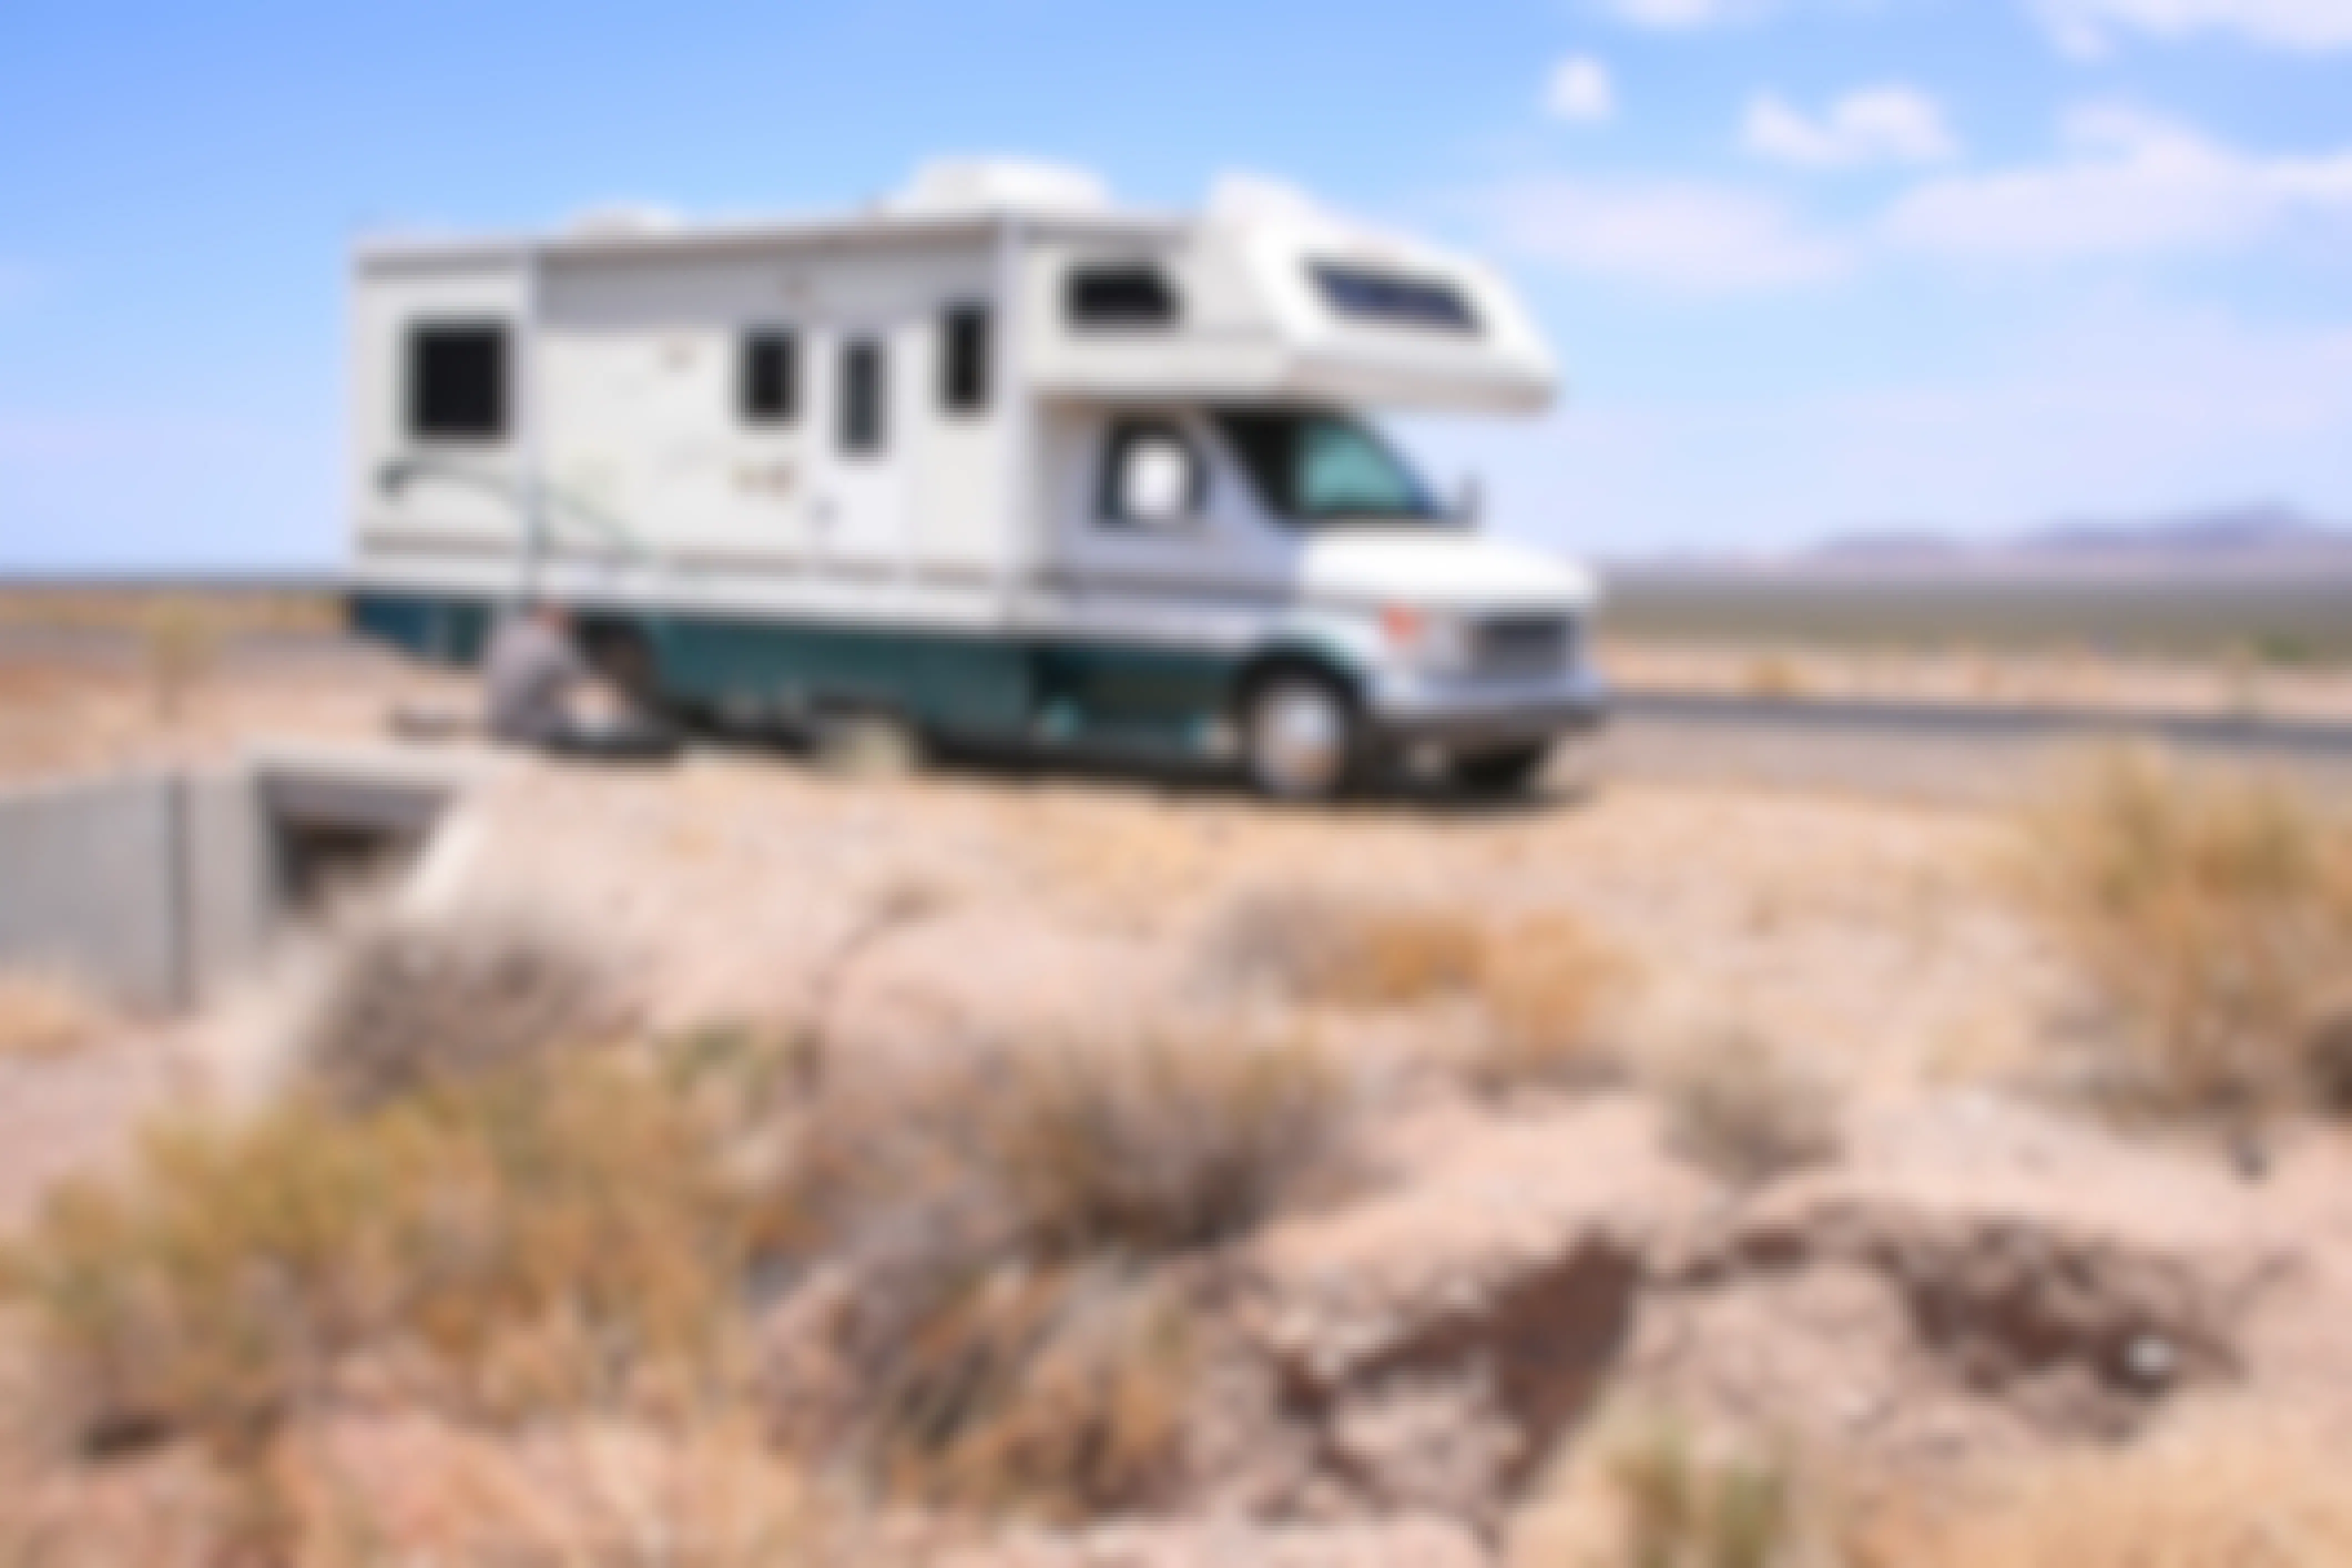 RV Motorhome on the side of a desert road, with the driver fixing a flat tire.